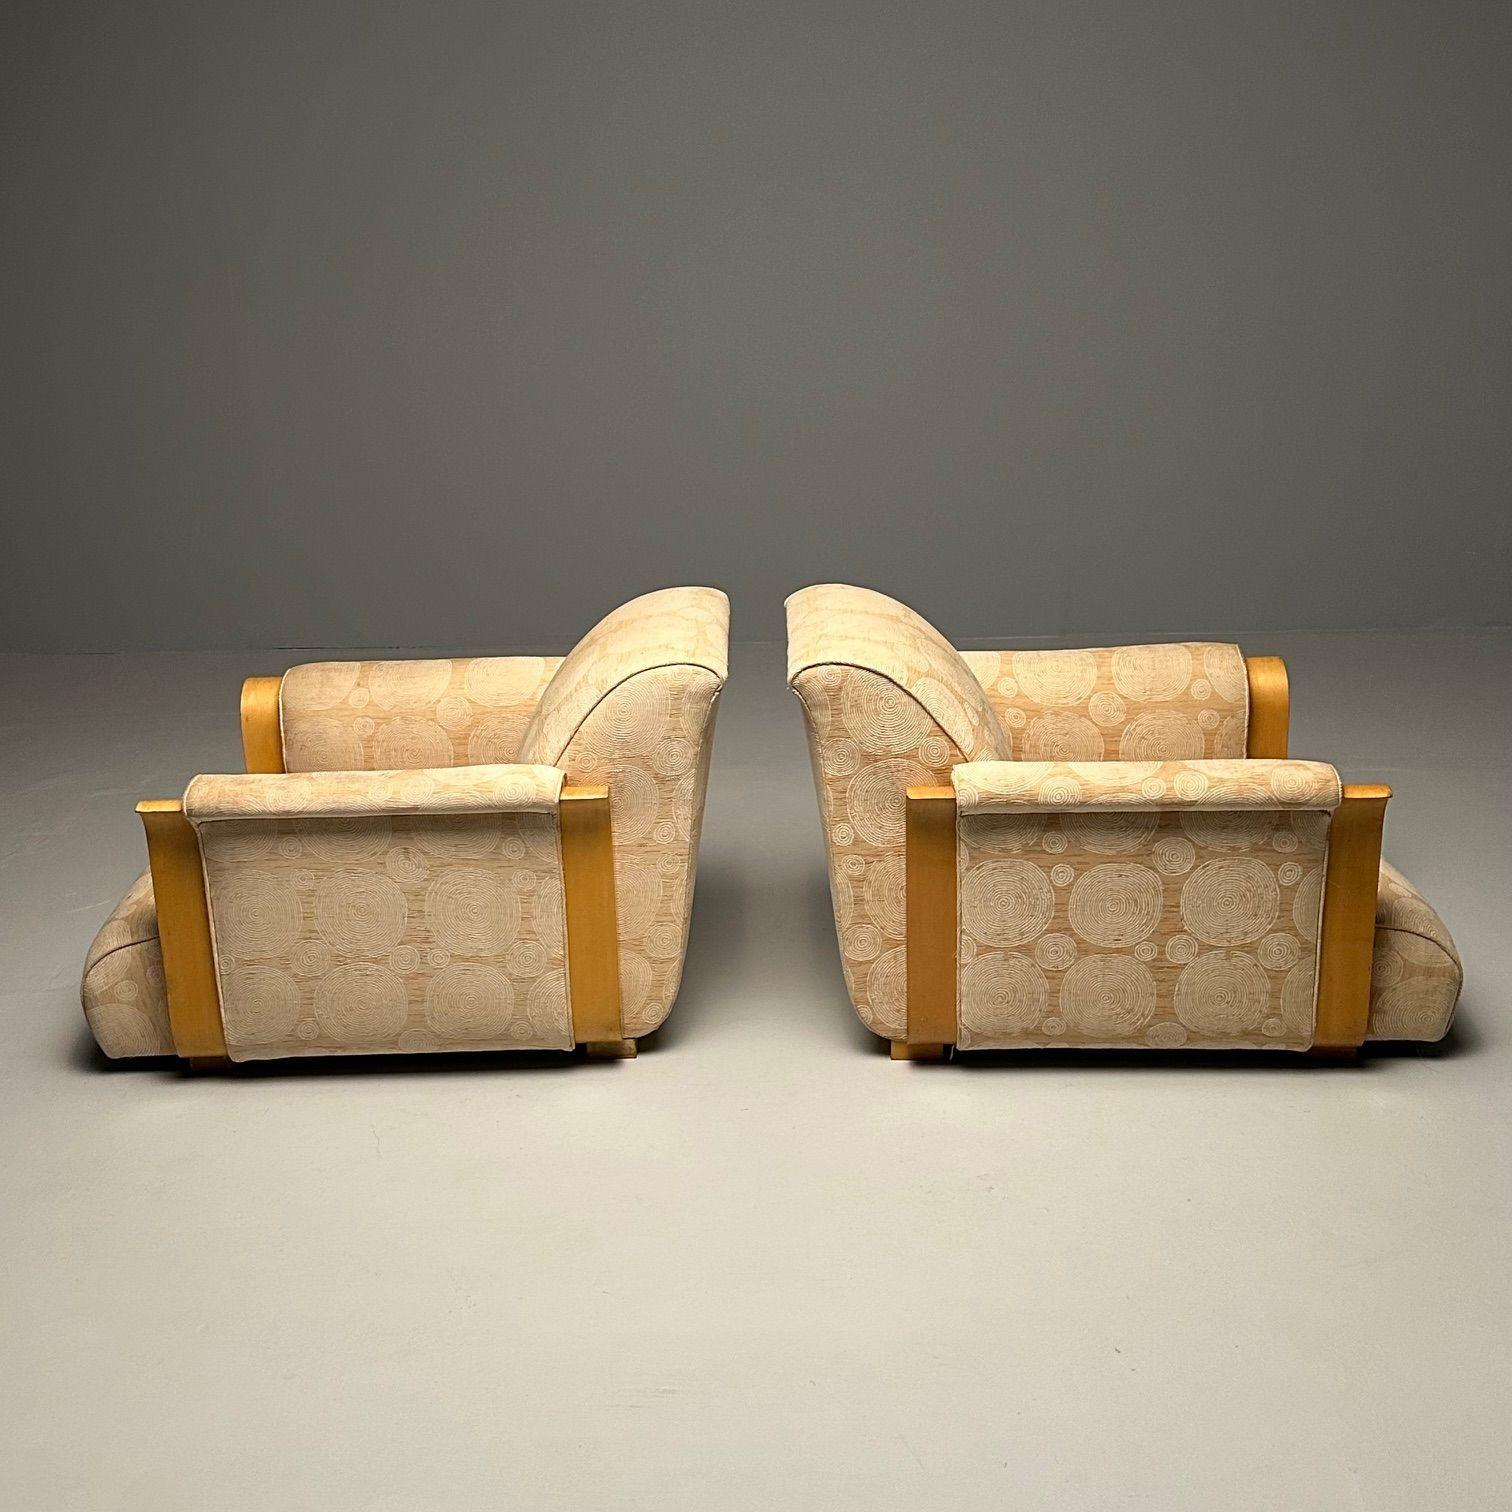 Rare Pair of French Art Deco Lounge Chairs by Michel Dufet, France, 1930s For Sale 2